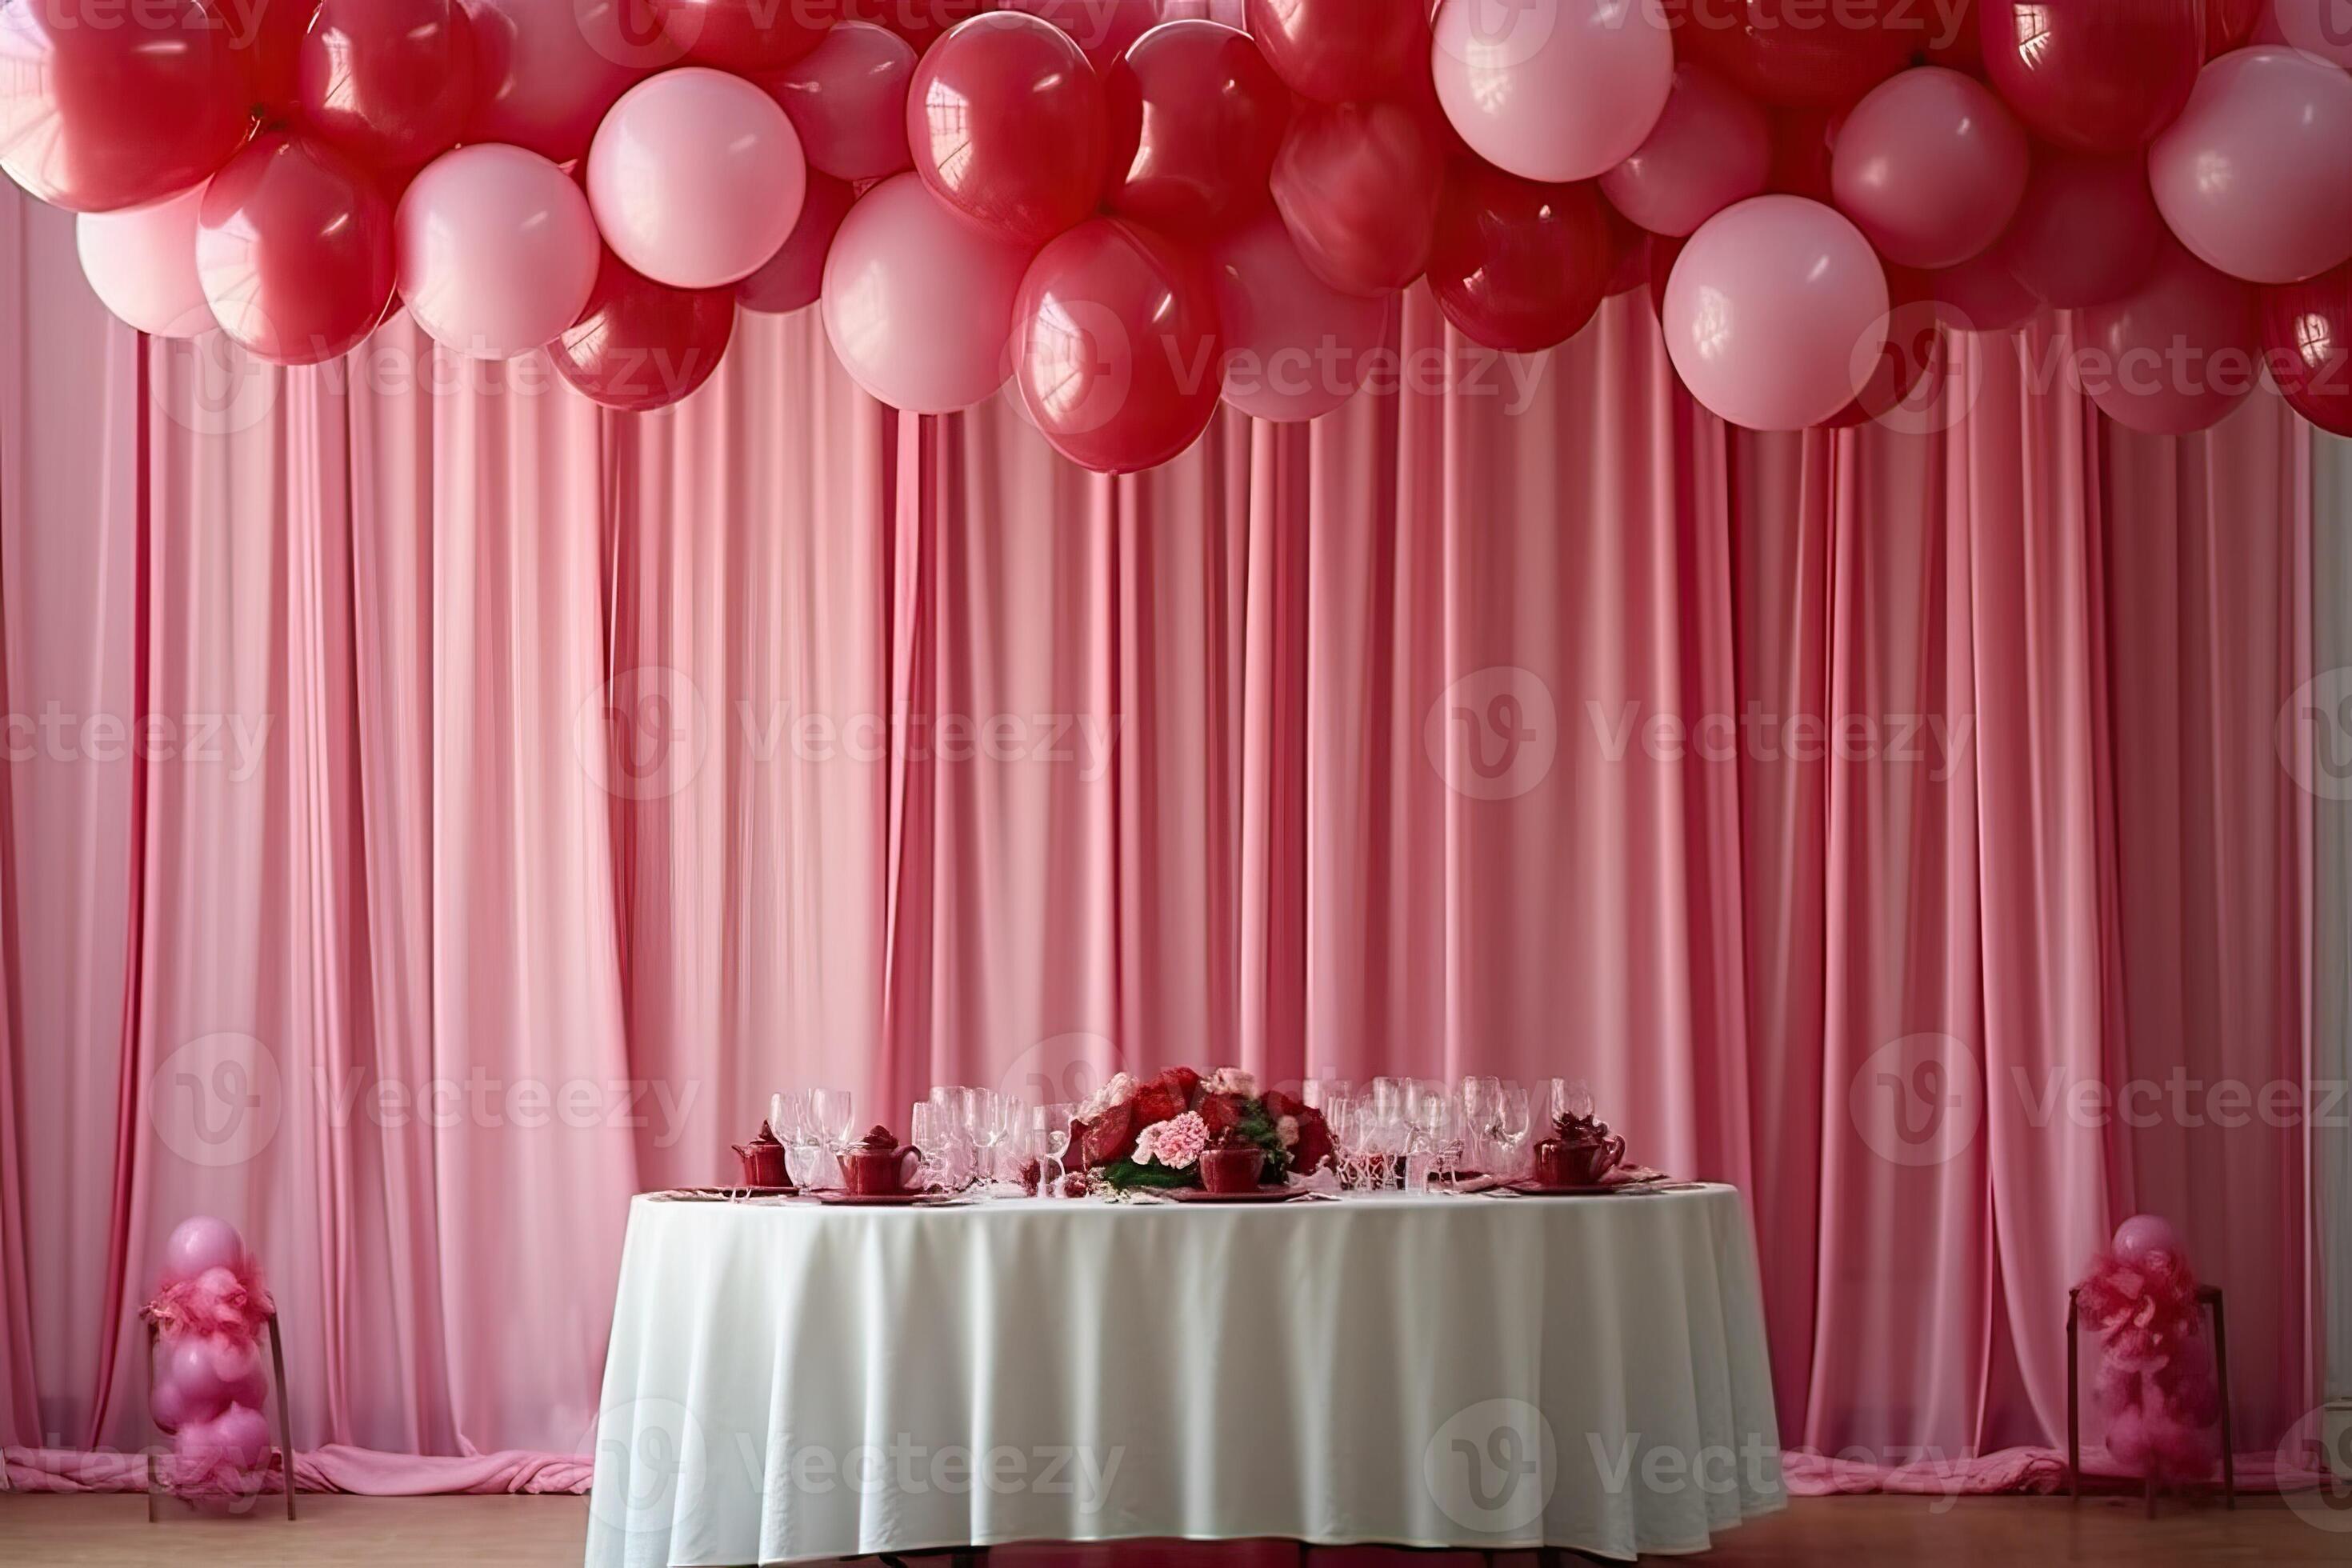 60 Best Balloon decoration ideas for any party - Craftionary